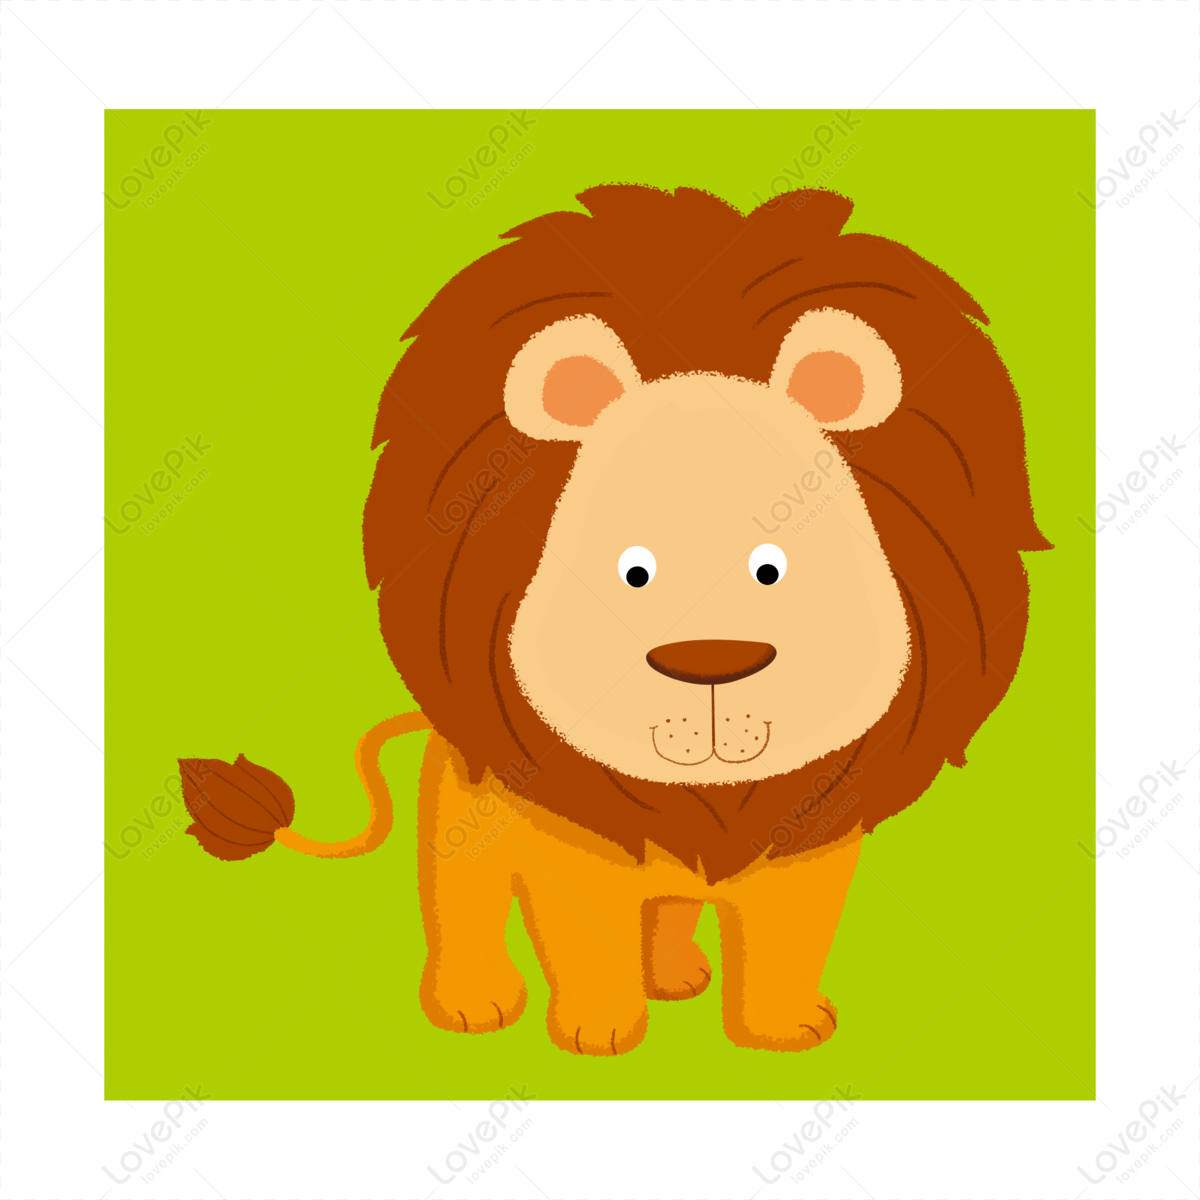 209 Confused Lion Royalty-Free Photos and Stock Images | Shutterstock